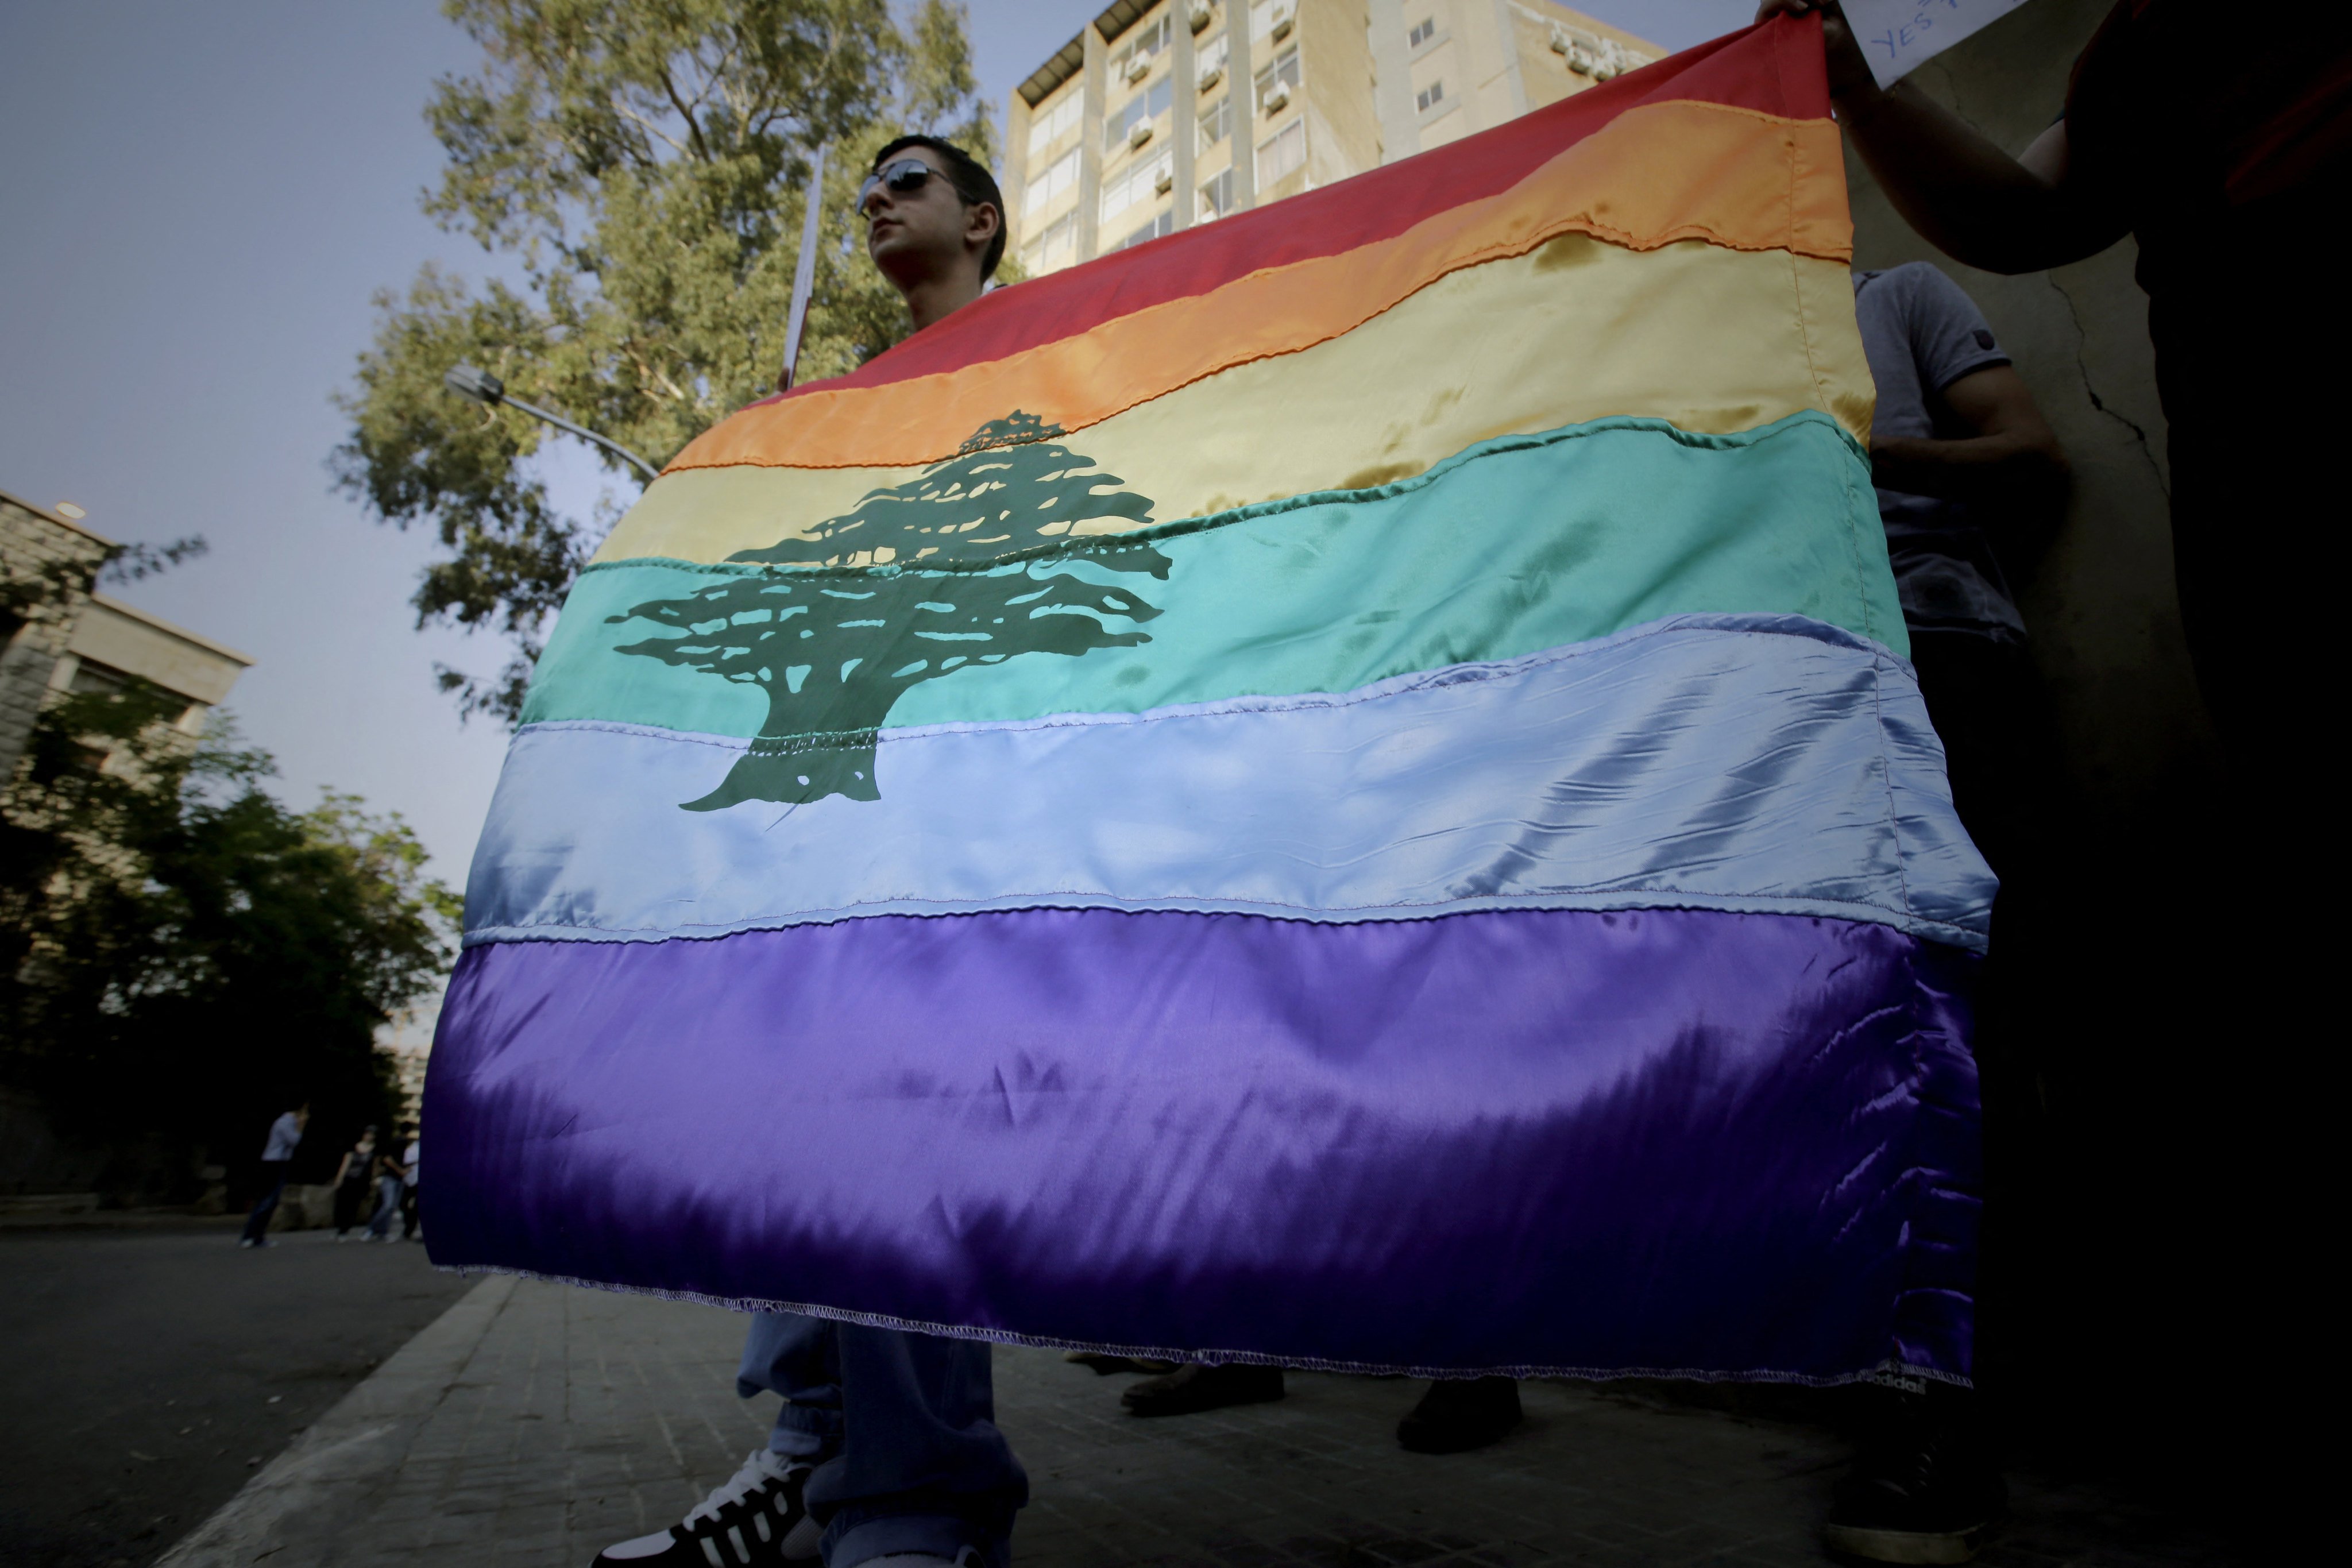 A gay pride flag bearing the cedar tree in the middle of it is carried by human rights activists during an anti-homophobia rally in Beirut on April 30, 2013. Lebanese homosexuals, human rights activists and members from the NGO Helem (the Arabic acronym of “Lebanese Protection for Lesbians, Gays, Bisexuals and Transgenders”) rallied to condemn the arrest on the weekend of three gay men and one transgender civilian in the town of Dekwaneh east of Beirut at a nightclub who were allegedly verbally and sexually harassed at the municipality headquarters. AFP PHOTO/JOSEPH EID (Photo by Joseph EID / AFP)